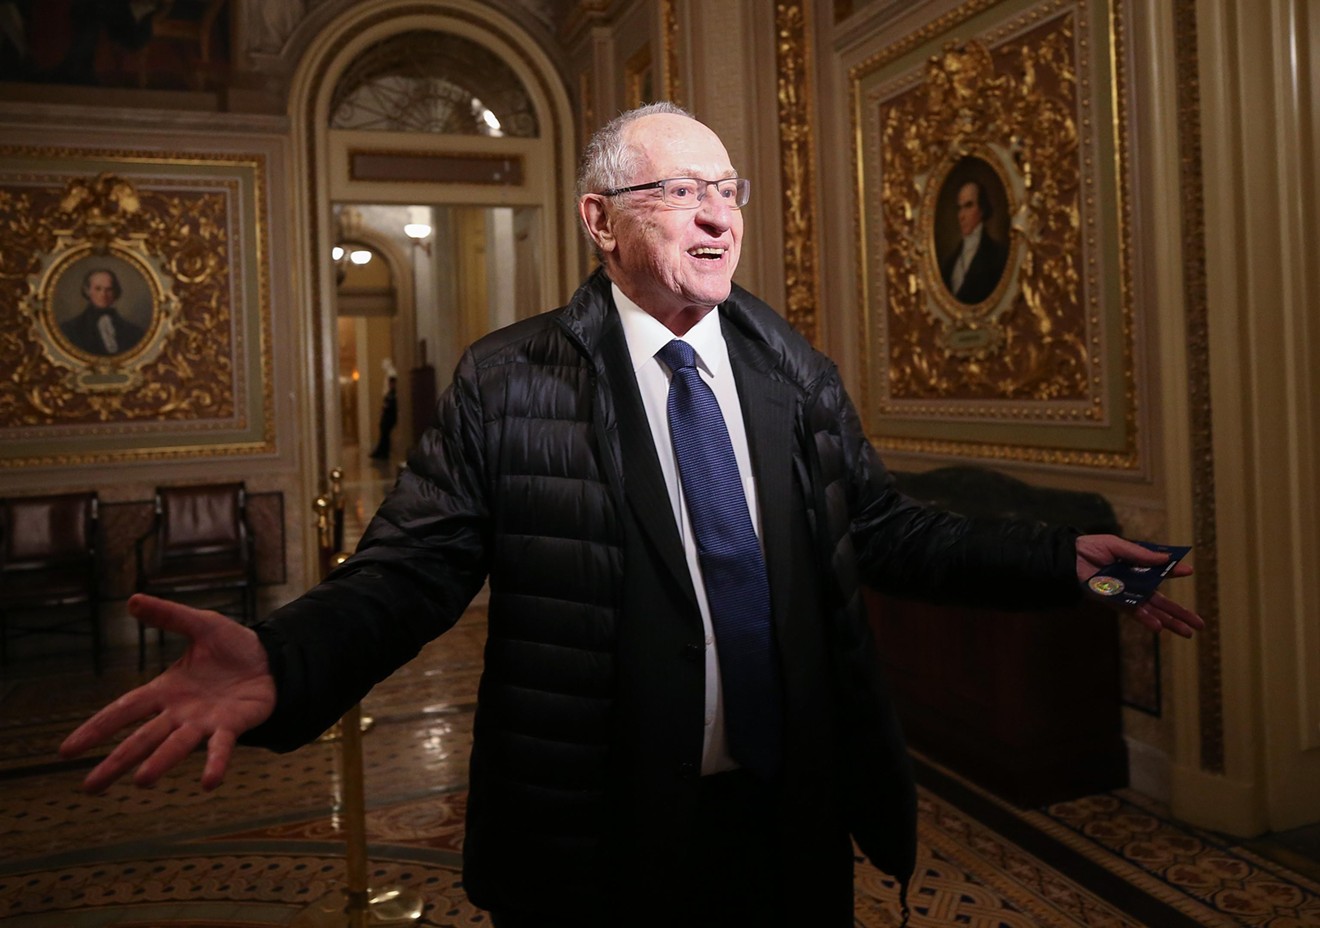 Alan Dershowitz serves as a member of Donald Trump's legal team during the Senate impeachment trial at the U.S. Capitol on January 27, 2020.